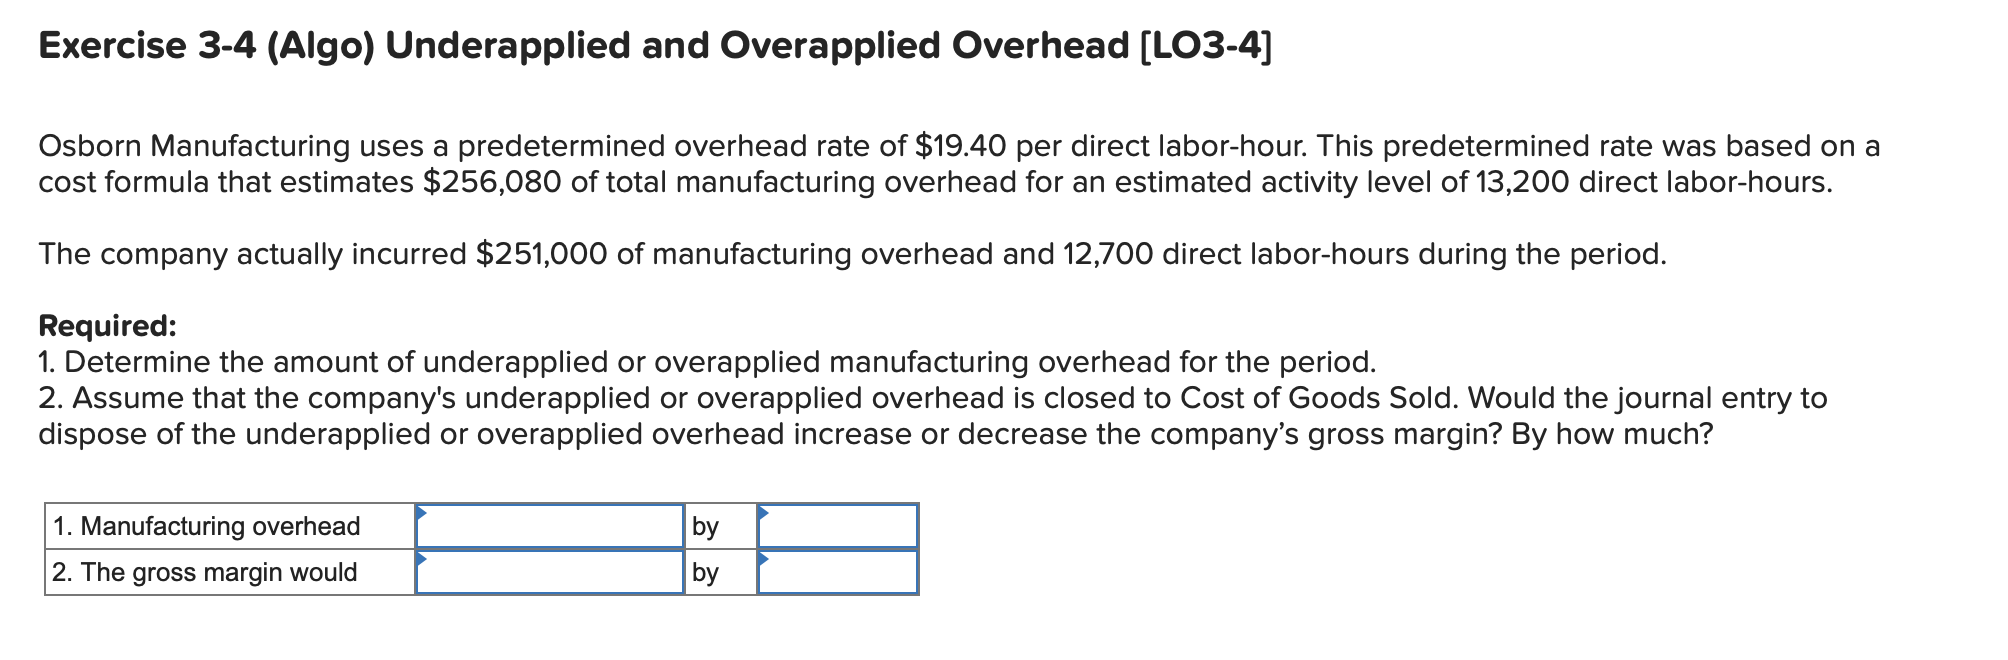 Exercise 3-4 (Algo) Underapplied and Overapplied Overhead [LO3-4] Osborn Manufacturing uses a predetermined